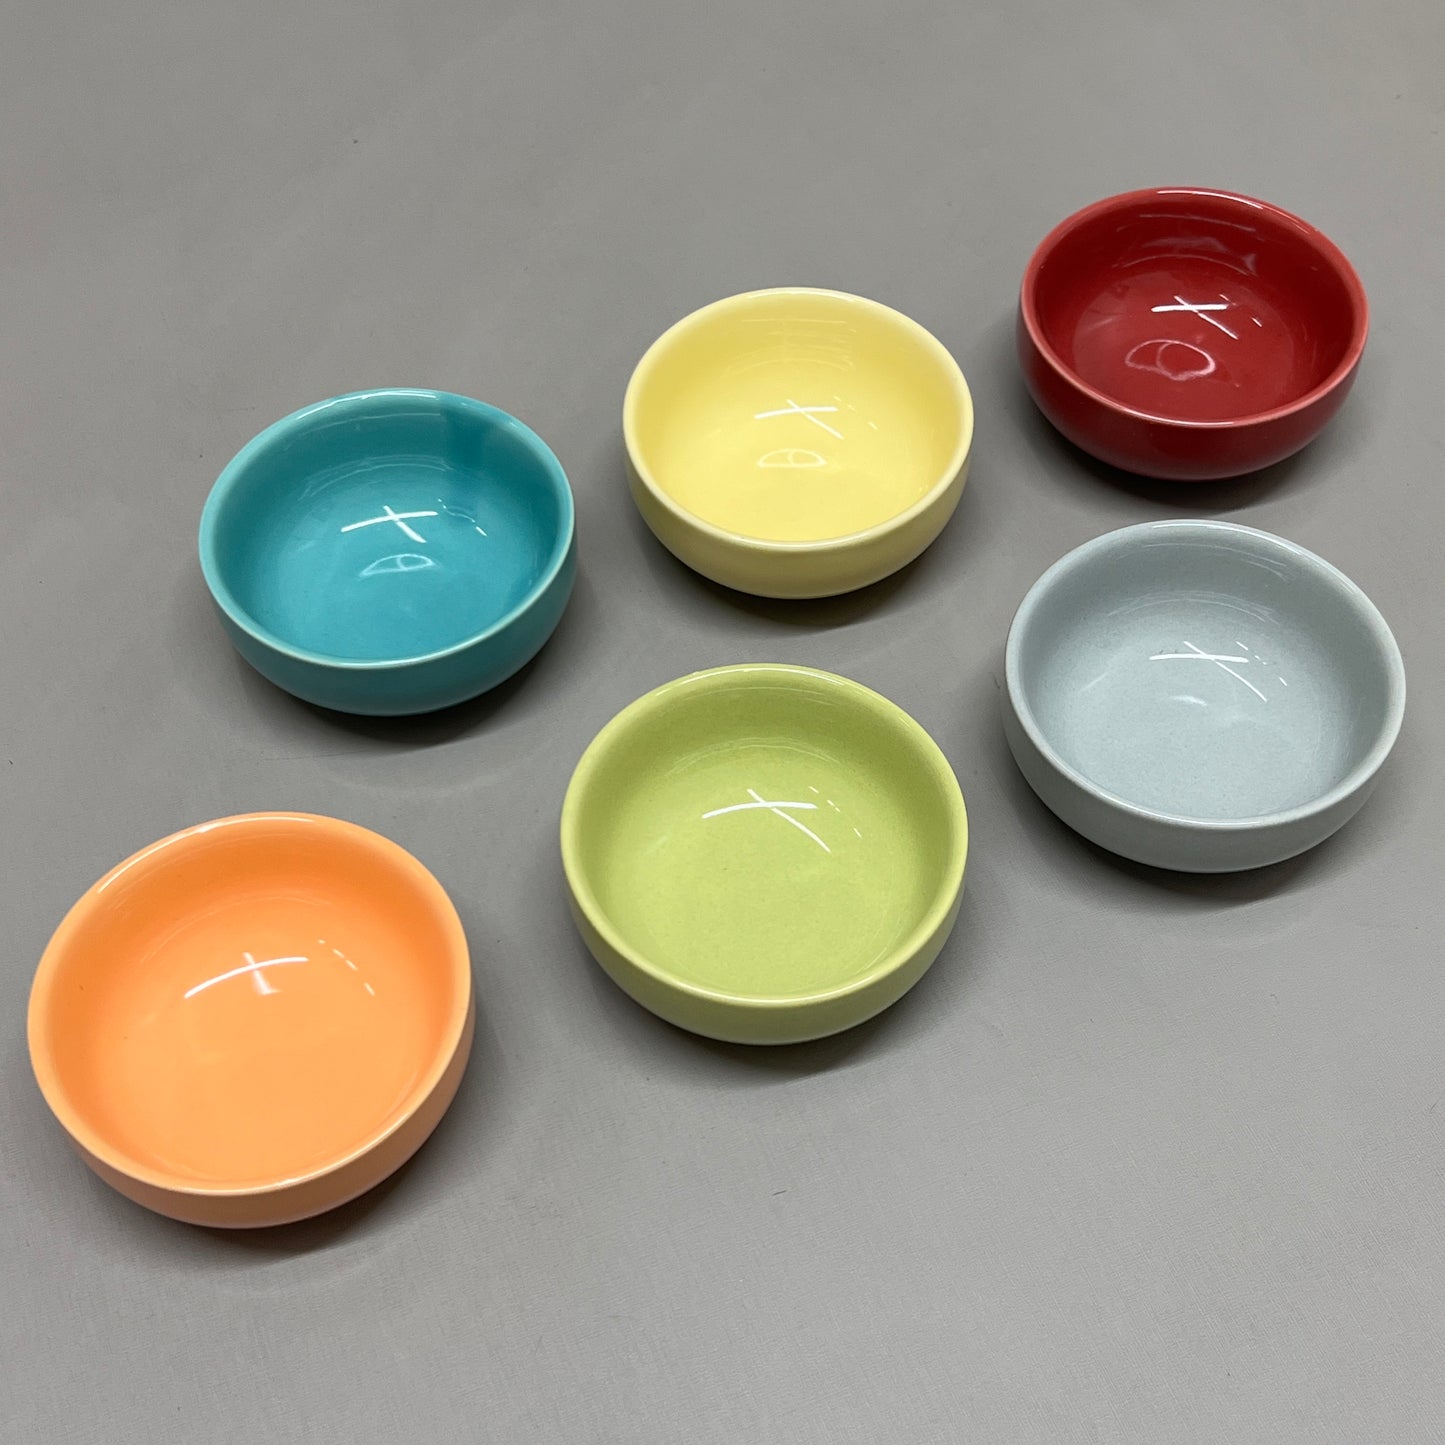 NOW DESIGNS 6-Pack! Canyon Stoneware Pinch Bowls 2oz/60mL 6 Colors L46001 (New)